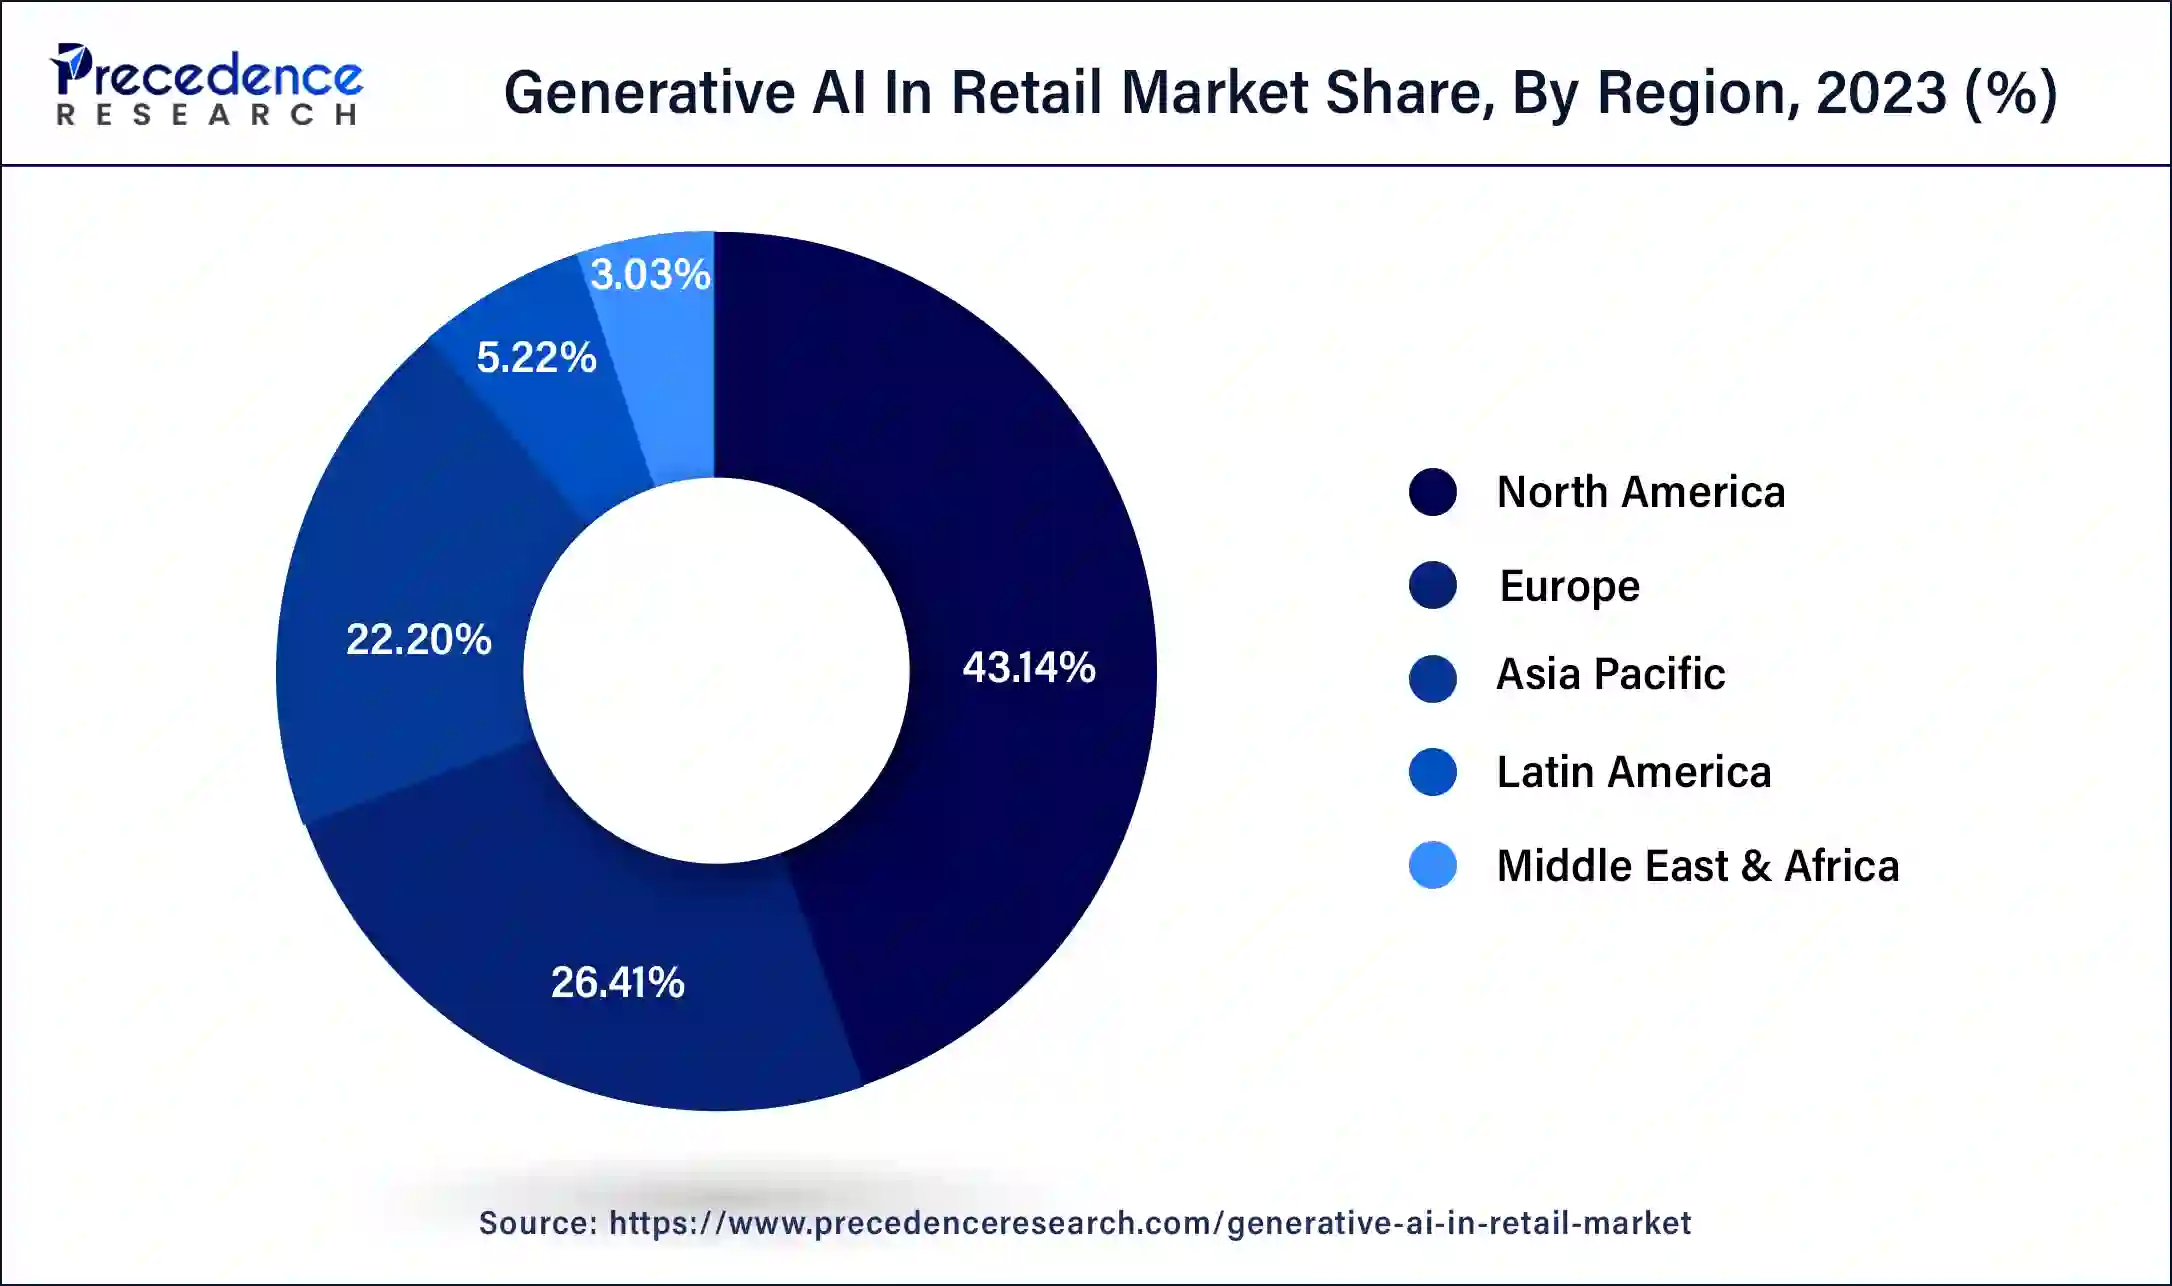 Generative AI in Retail Market Share, By Region, 2023 (%)